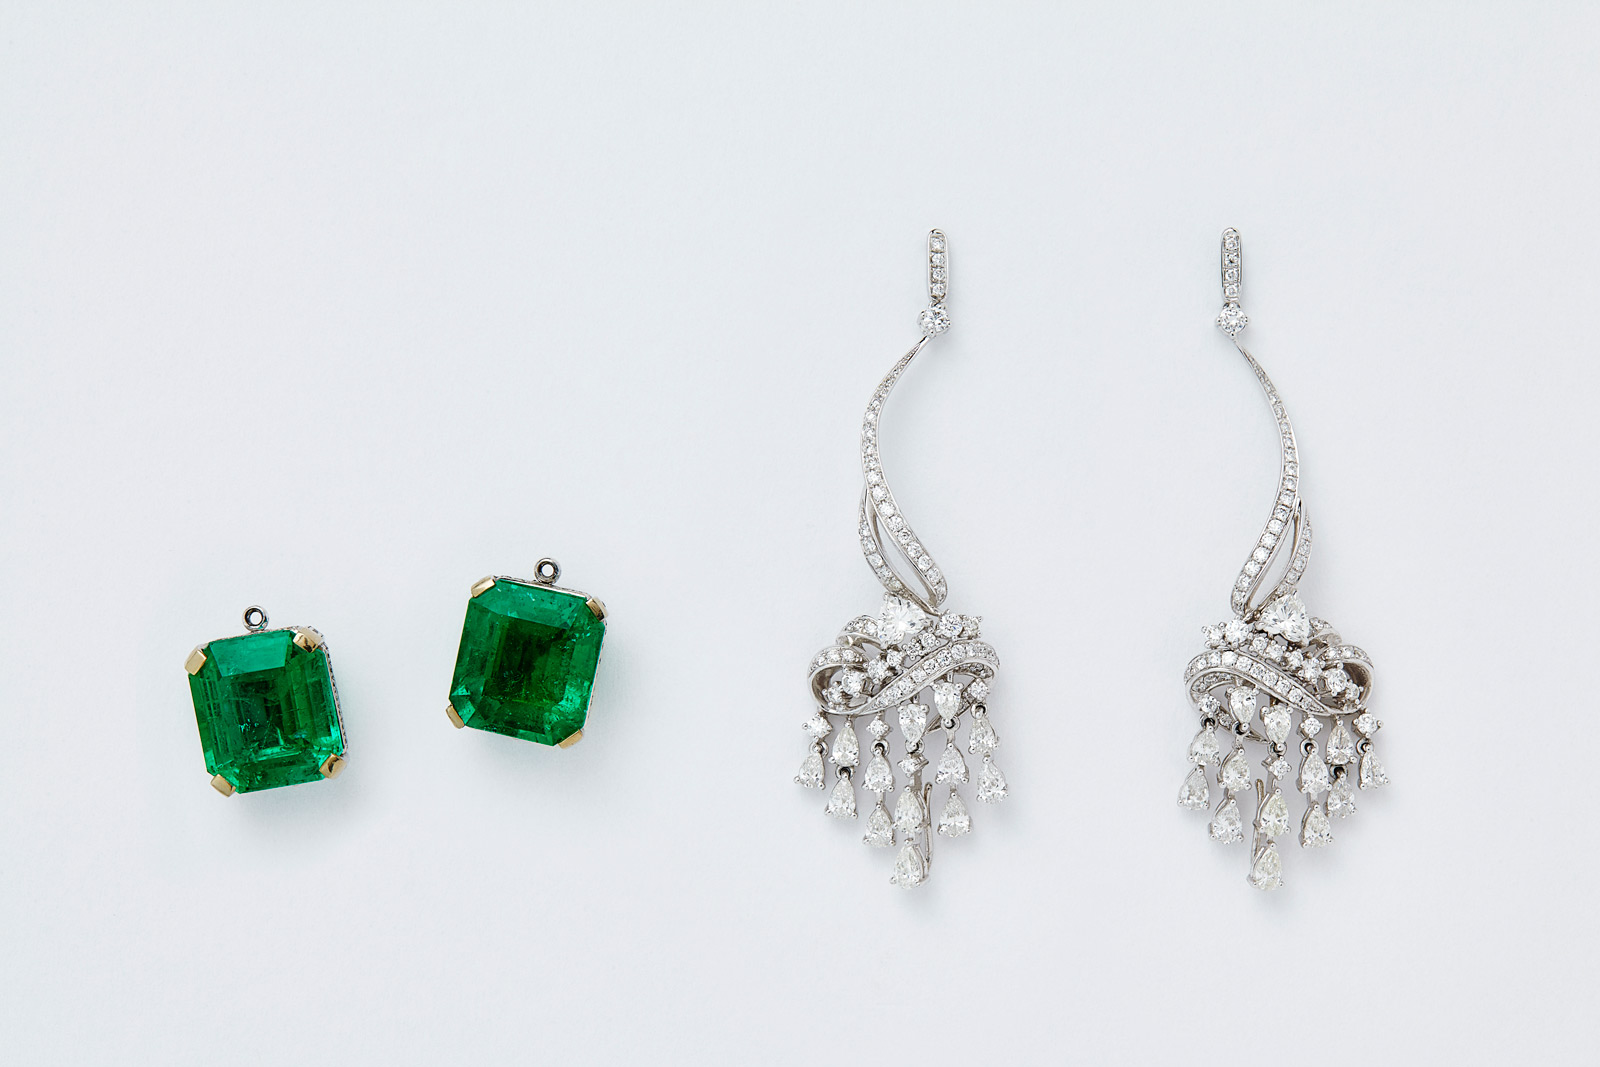 Qiu Fine Jewelry 3 in 1 earrings with Colombian emeralds 10 cts each and diamonds